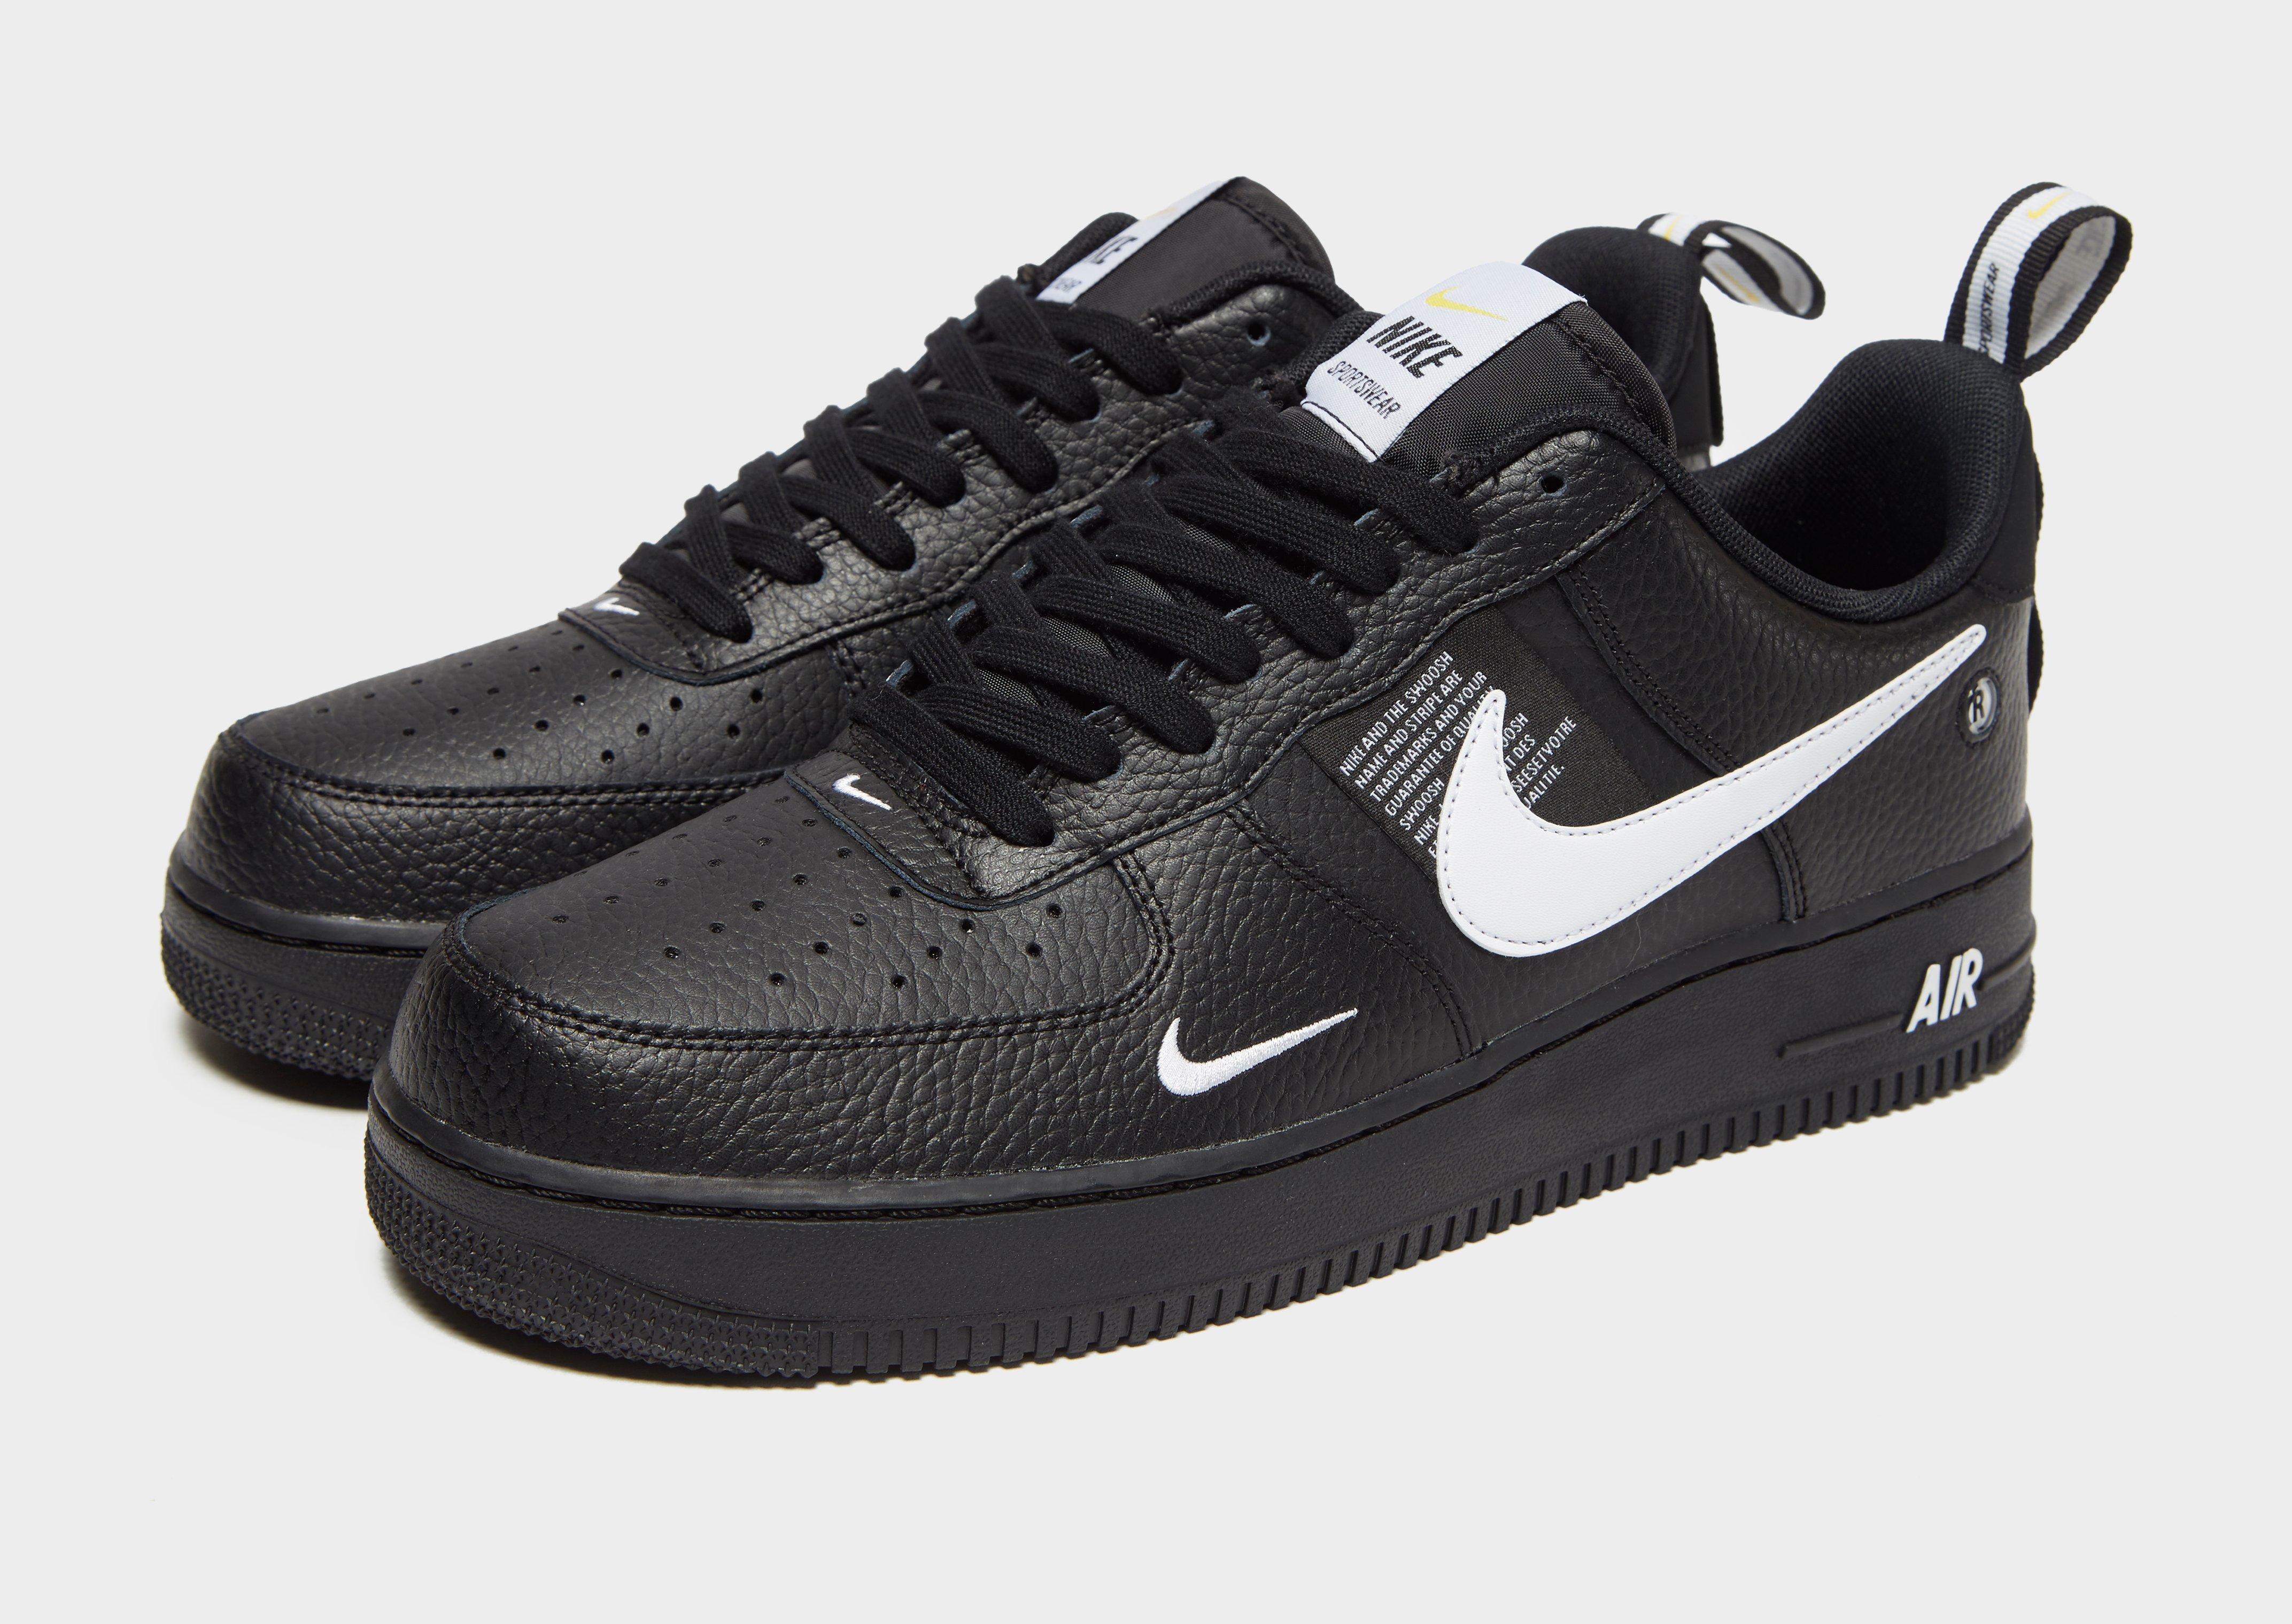 Nike Leather Air Force 1 '07 Lv8 Utility Low in Black/White (Black) for